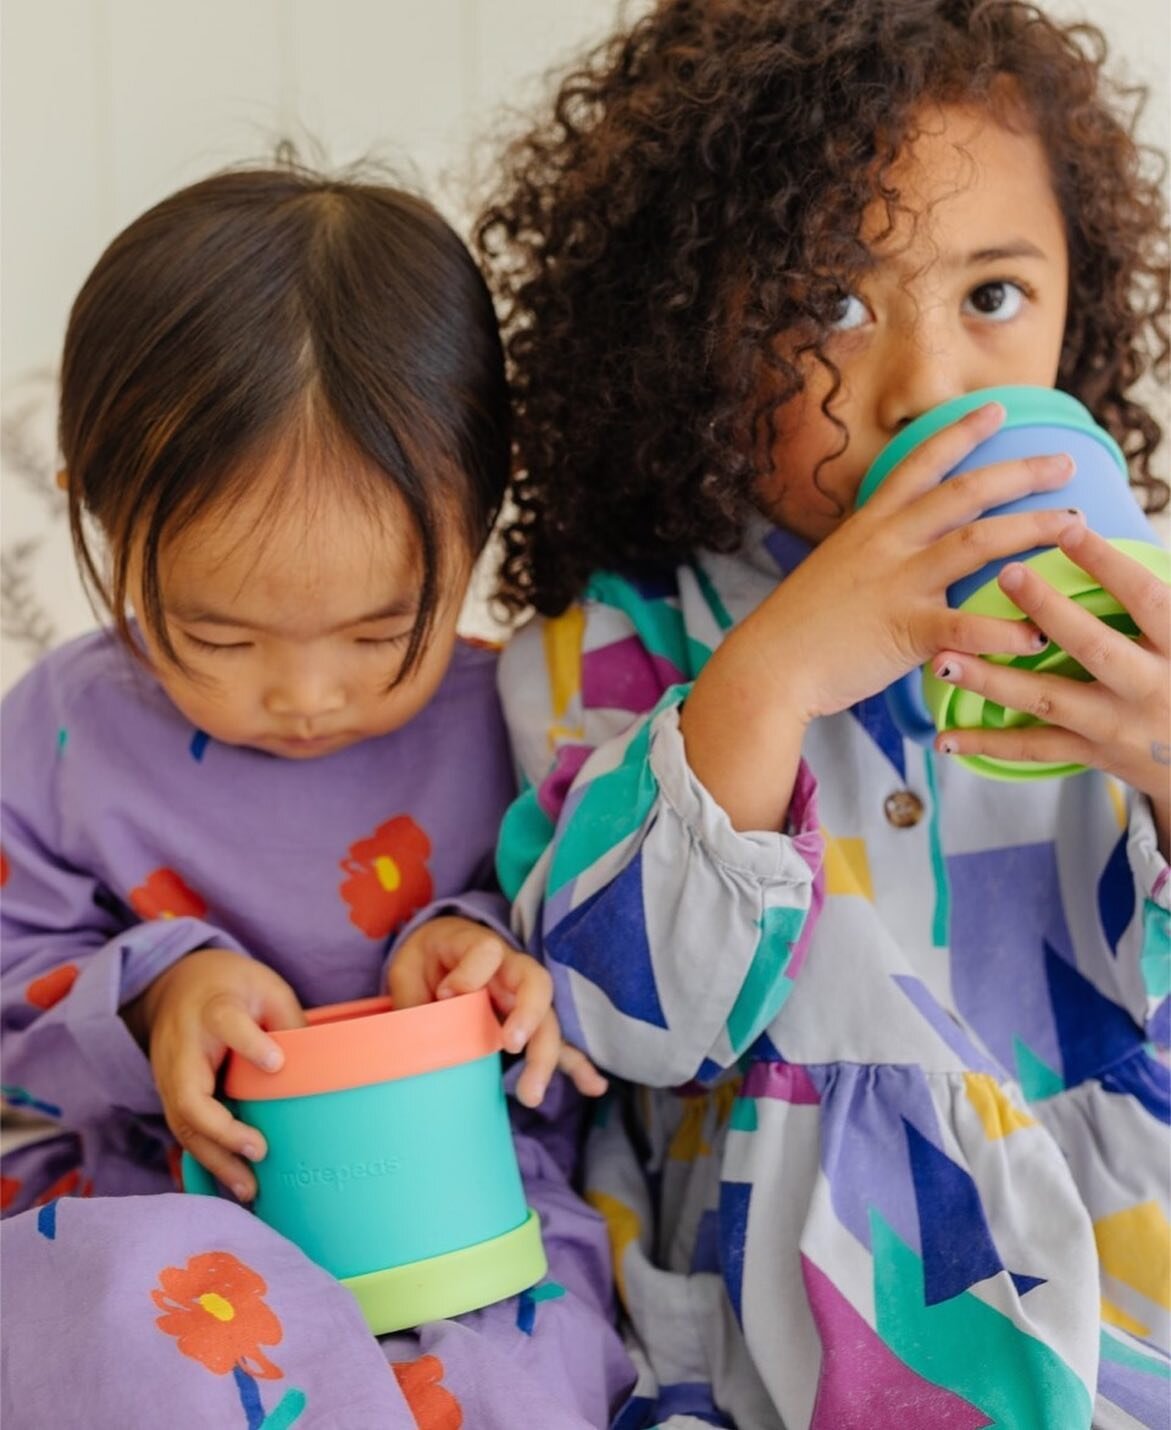 New line in the Ritz Sisters showroom!
Repost from @morepeaskids 
Our morepeas Essential Snack Cup is the perfect accessory for snack loving besties! 🙌🏼 Who's yours? 👯&zwj;♀️⁠
⁠
⁠
⁠
#morepeas #Snacktime #ParentingWin #MomLife #DadLife #FriendshipG